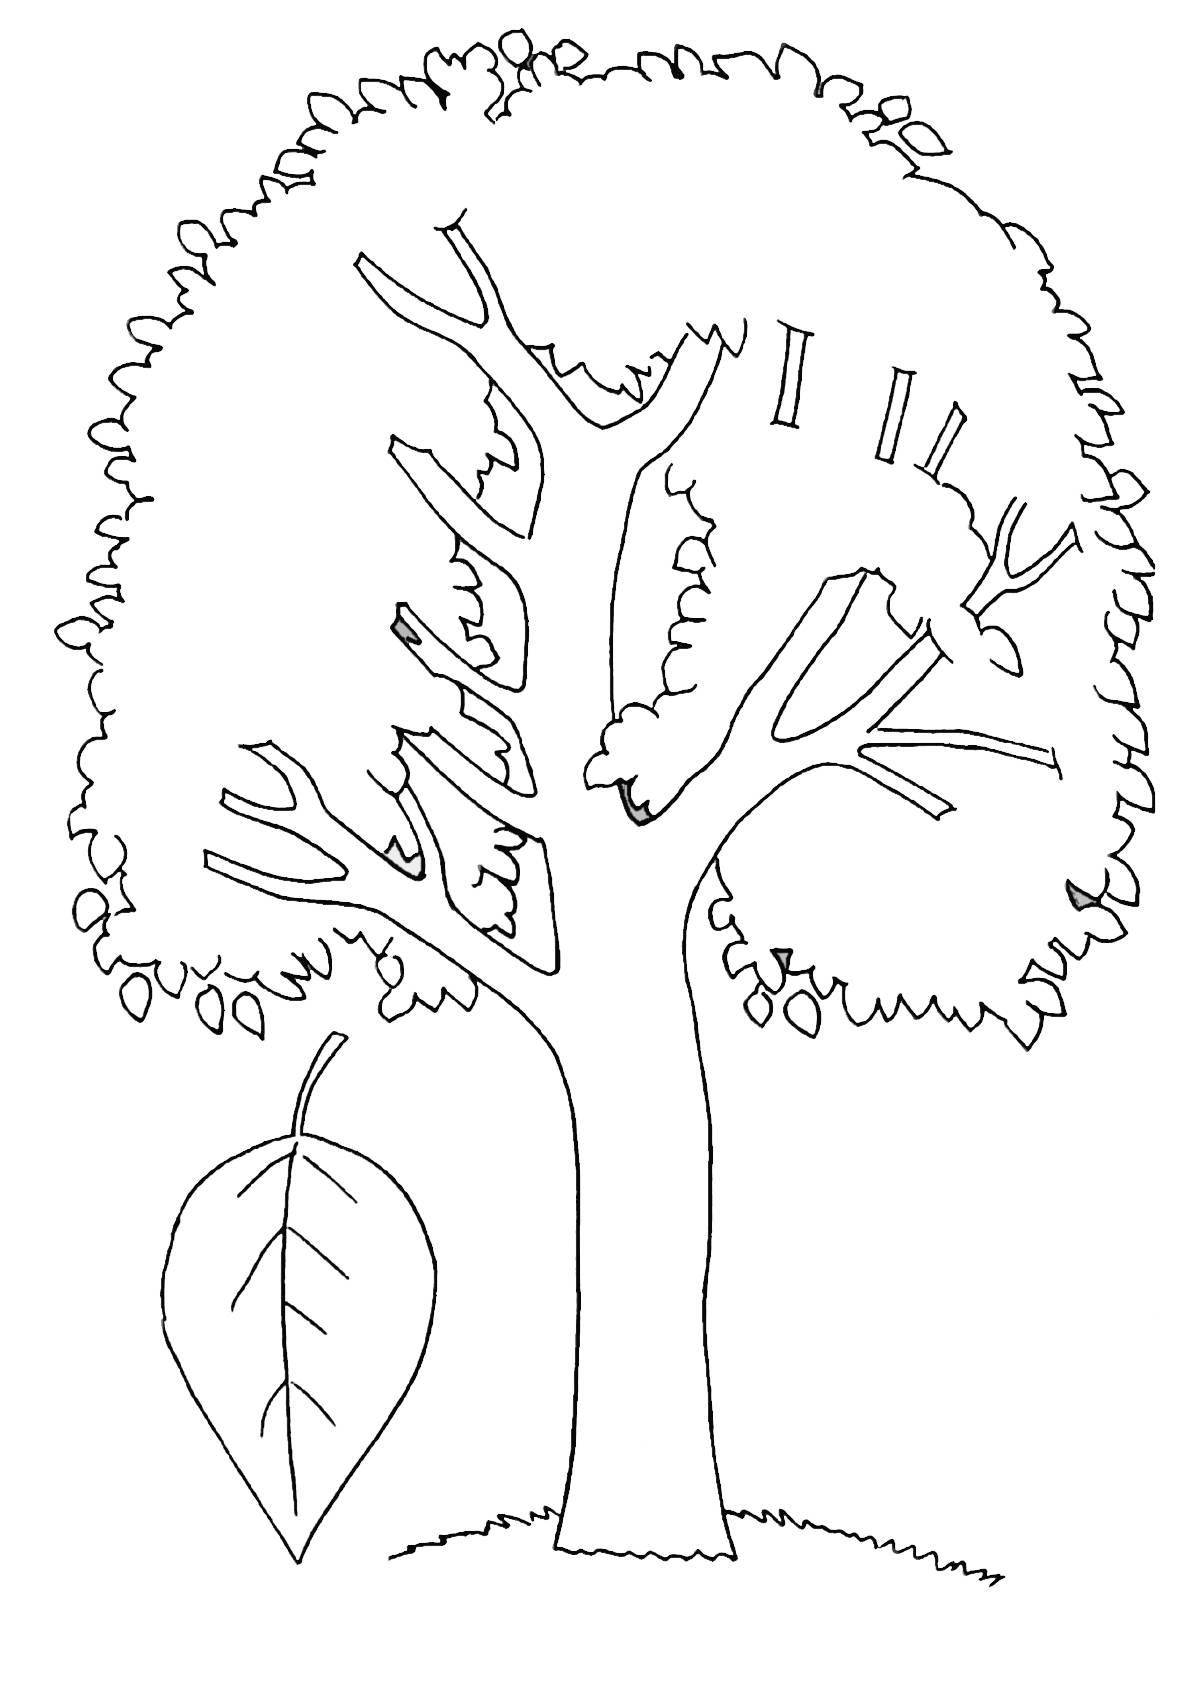 Adorable tree coloring book for children 5-6 years old